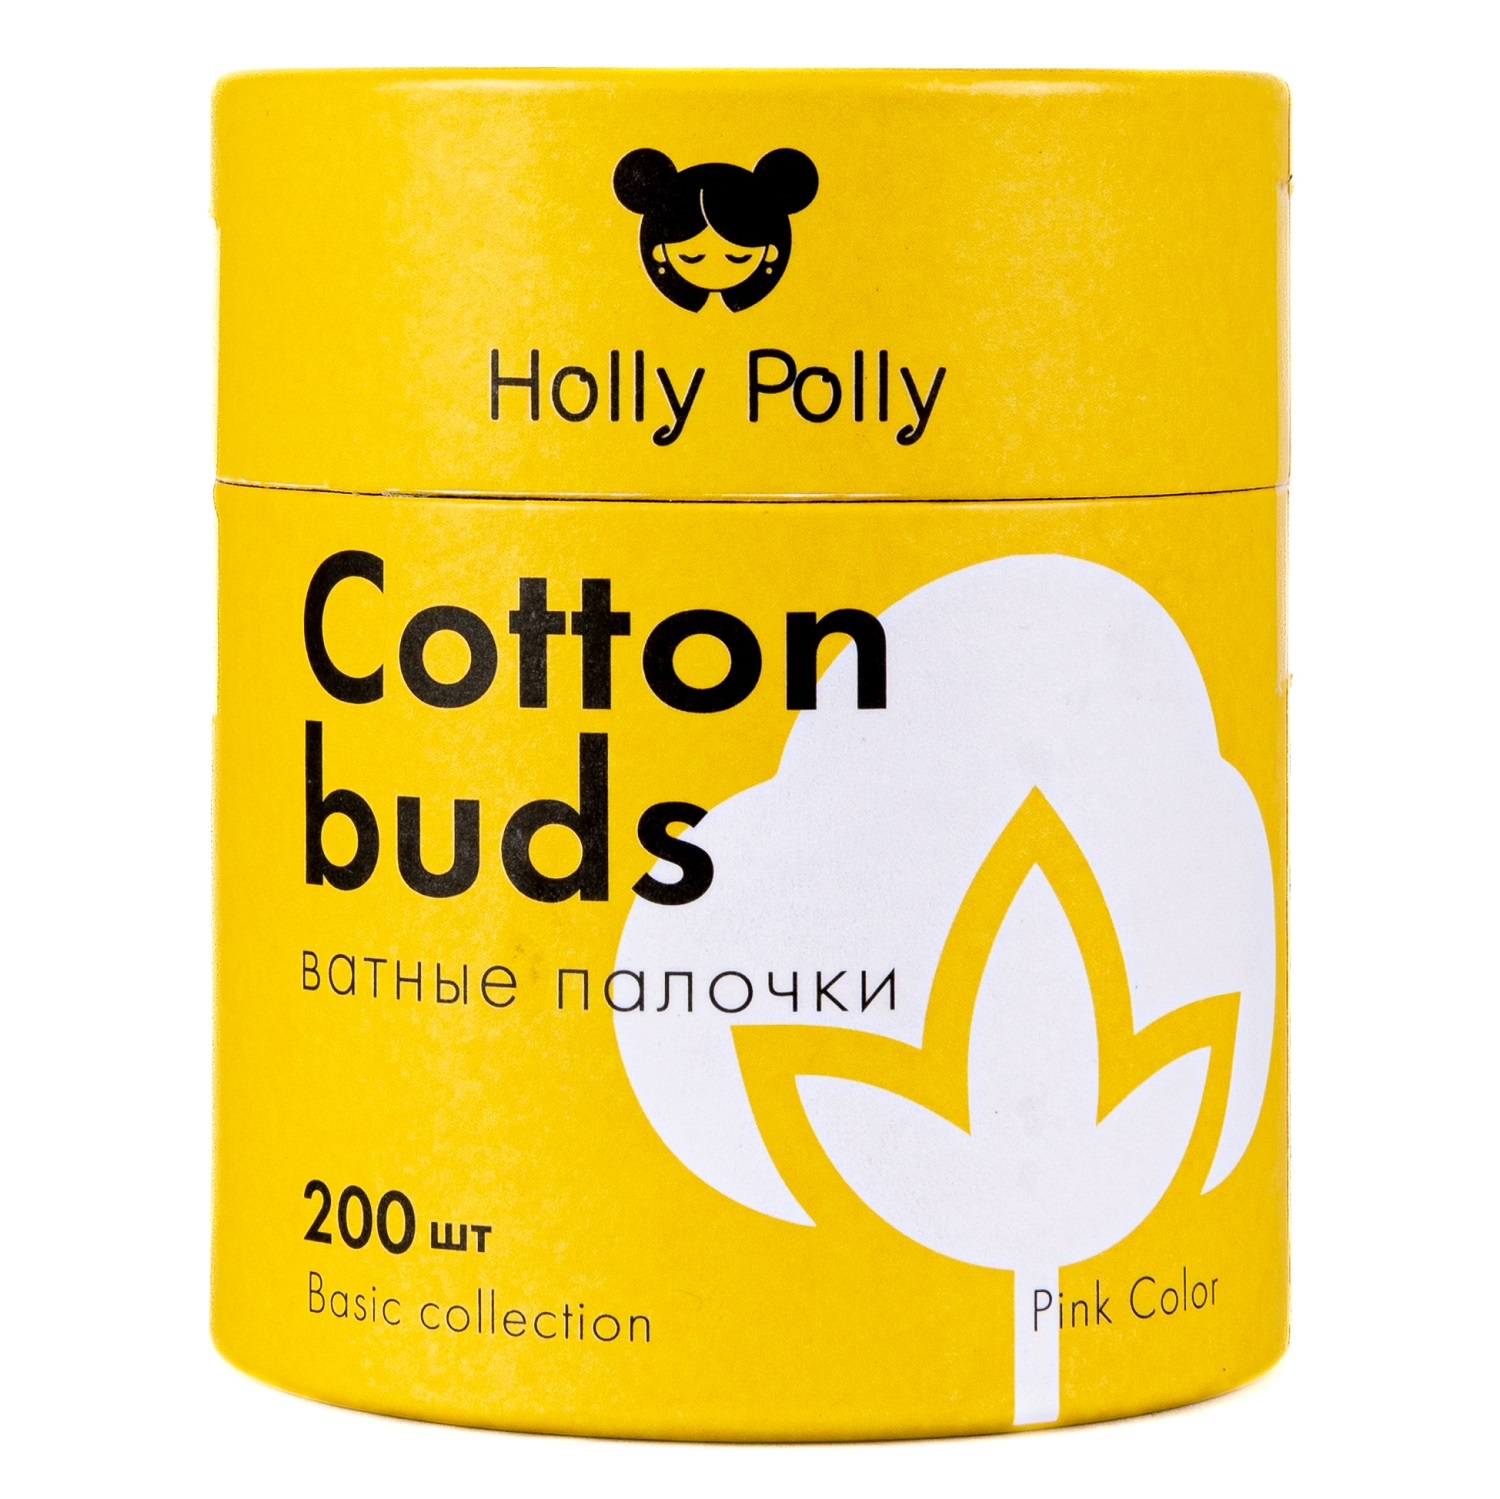 Holly Polly Косметические ватные палочки бамбуковые розовые, 200 шт (Holly Polly, Cotton Pads & Buds)